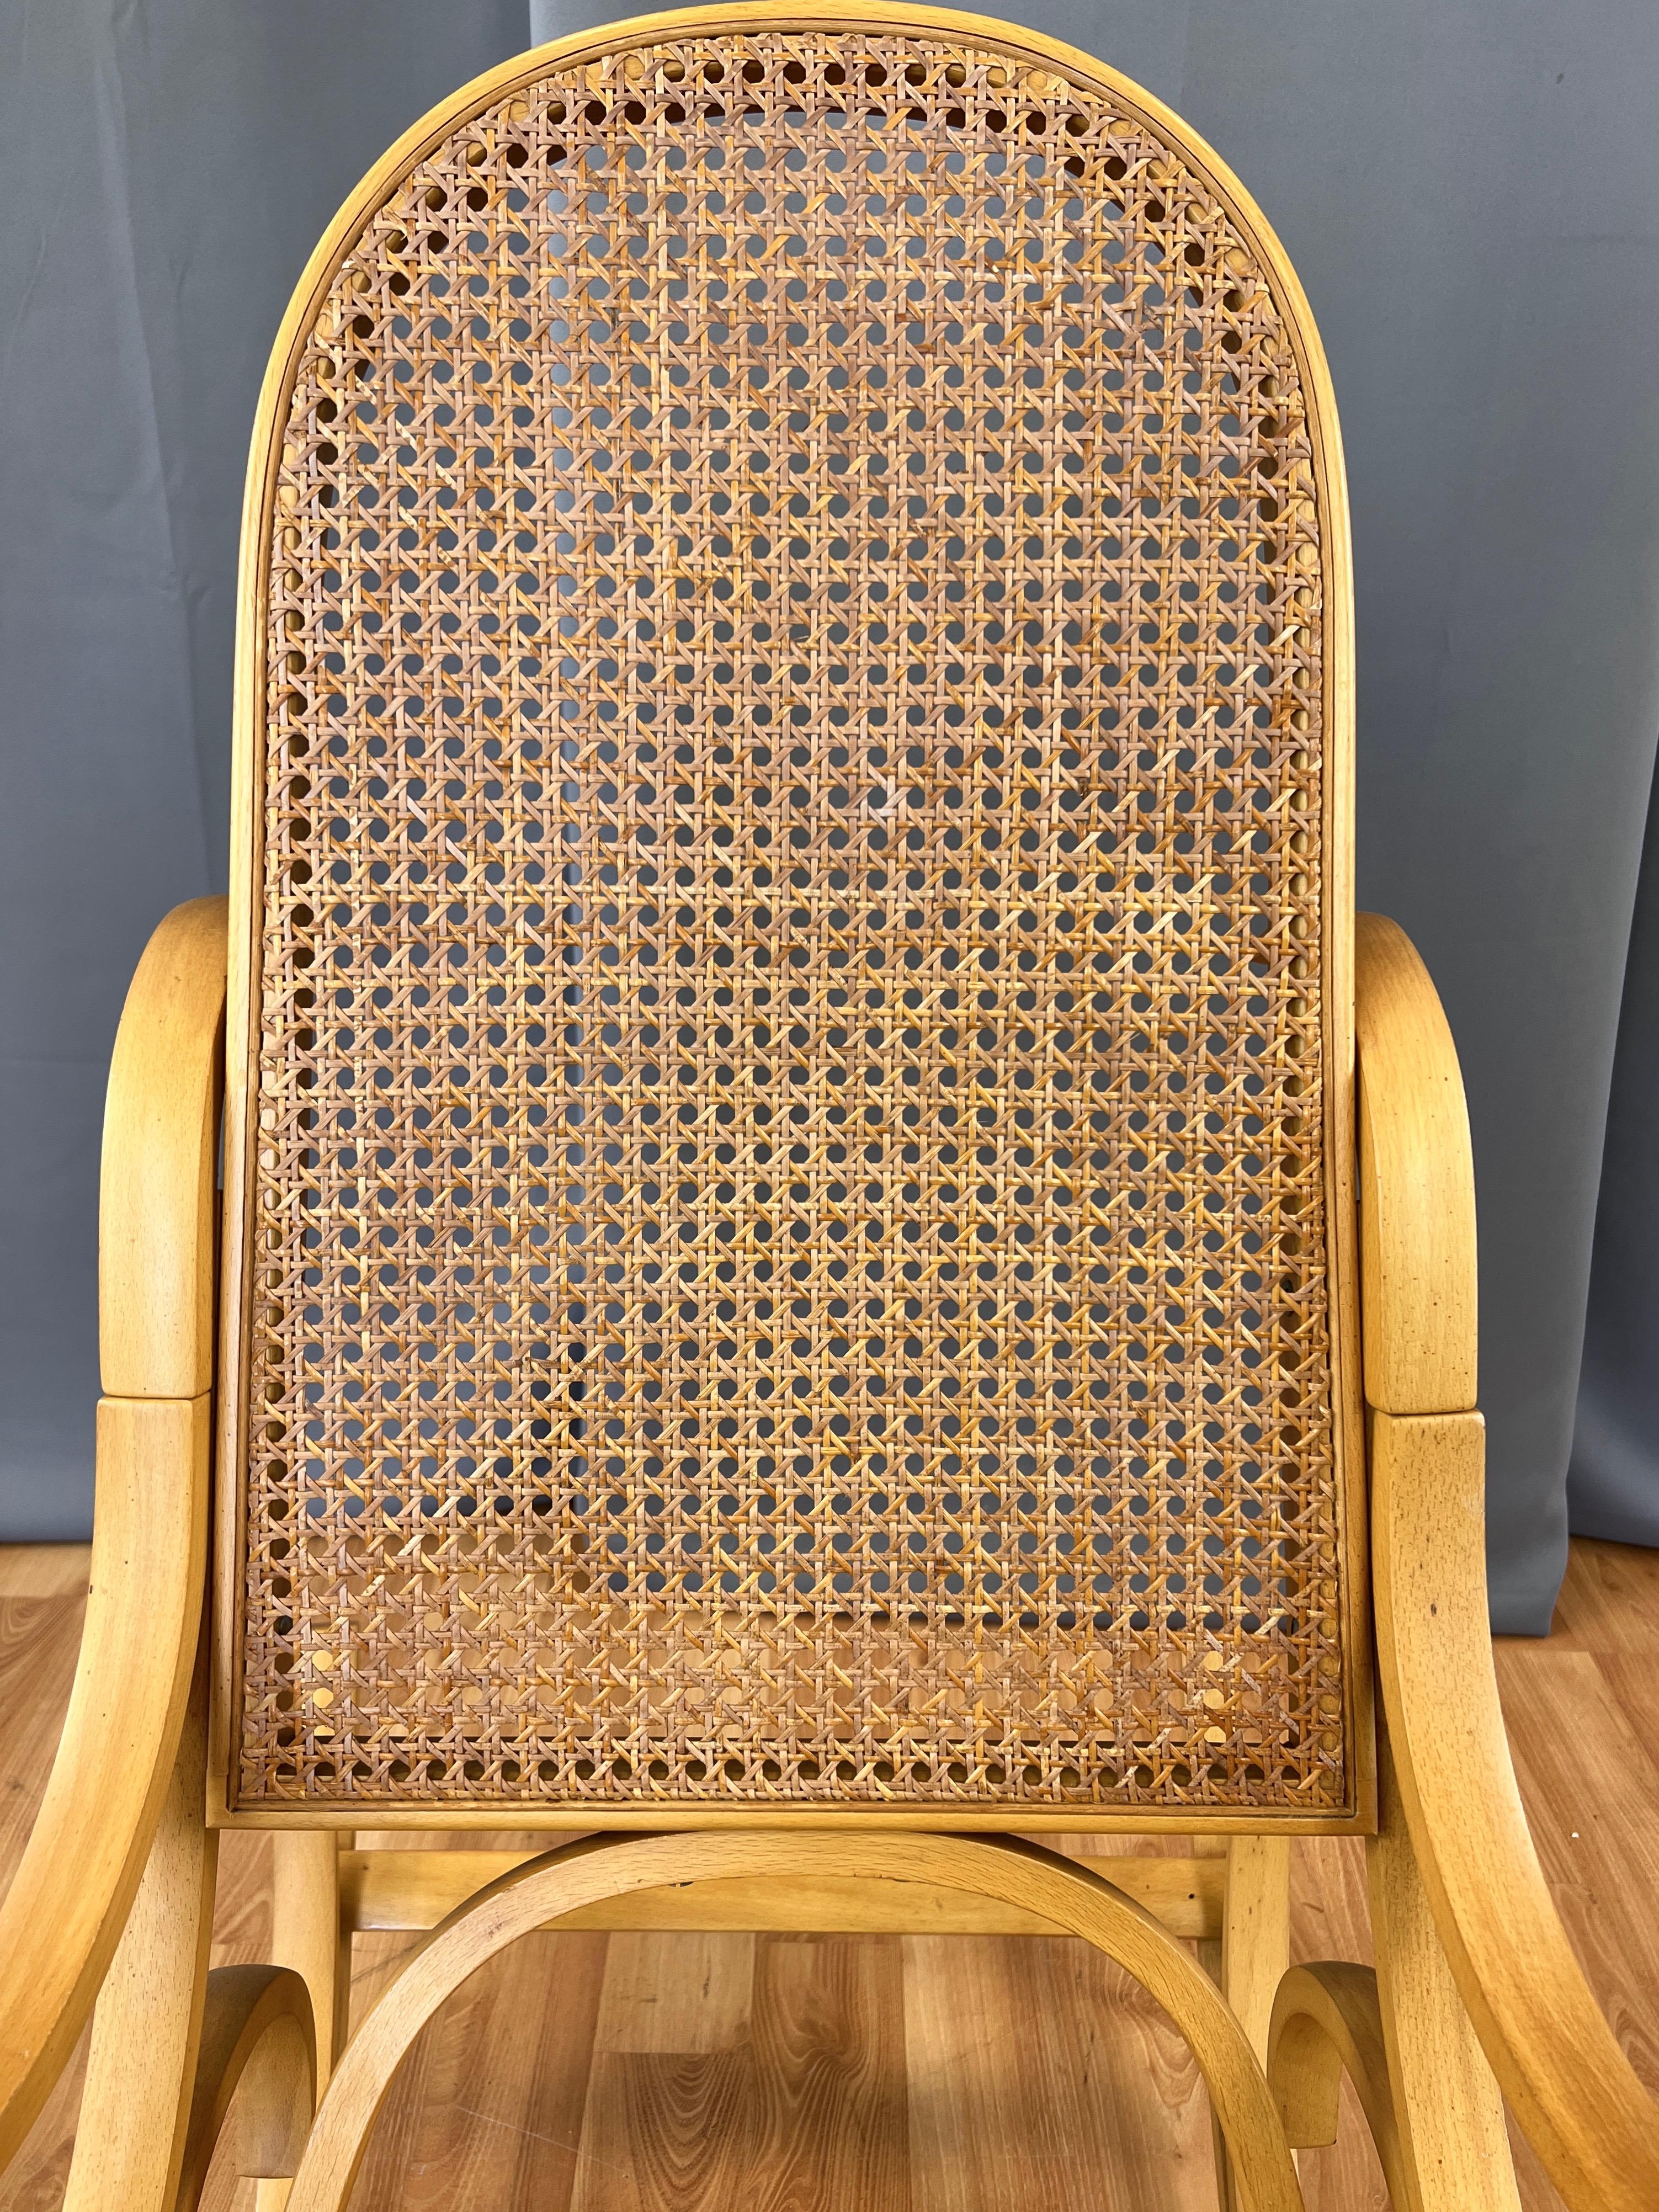 Luigi Crassevig Italian Bentwood Rocking Chair with Woven Cane Seat, 1970s For Sale 4